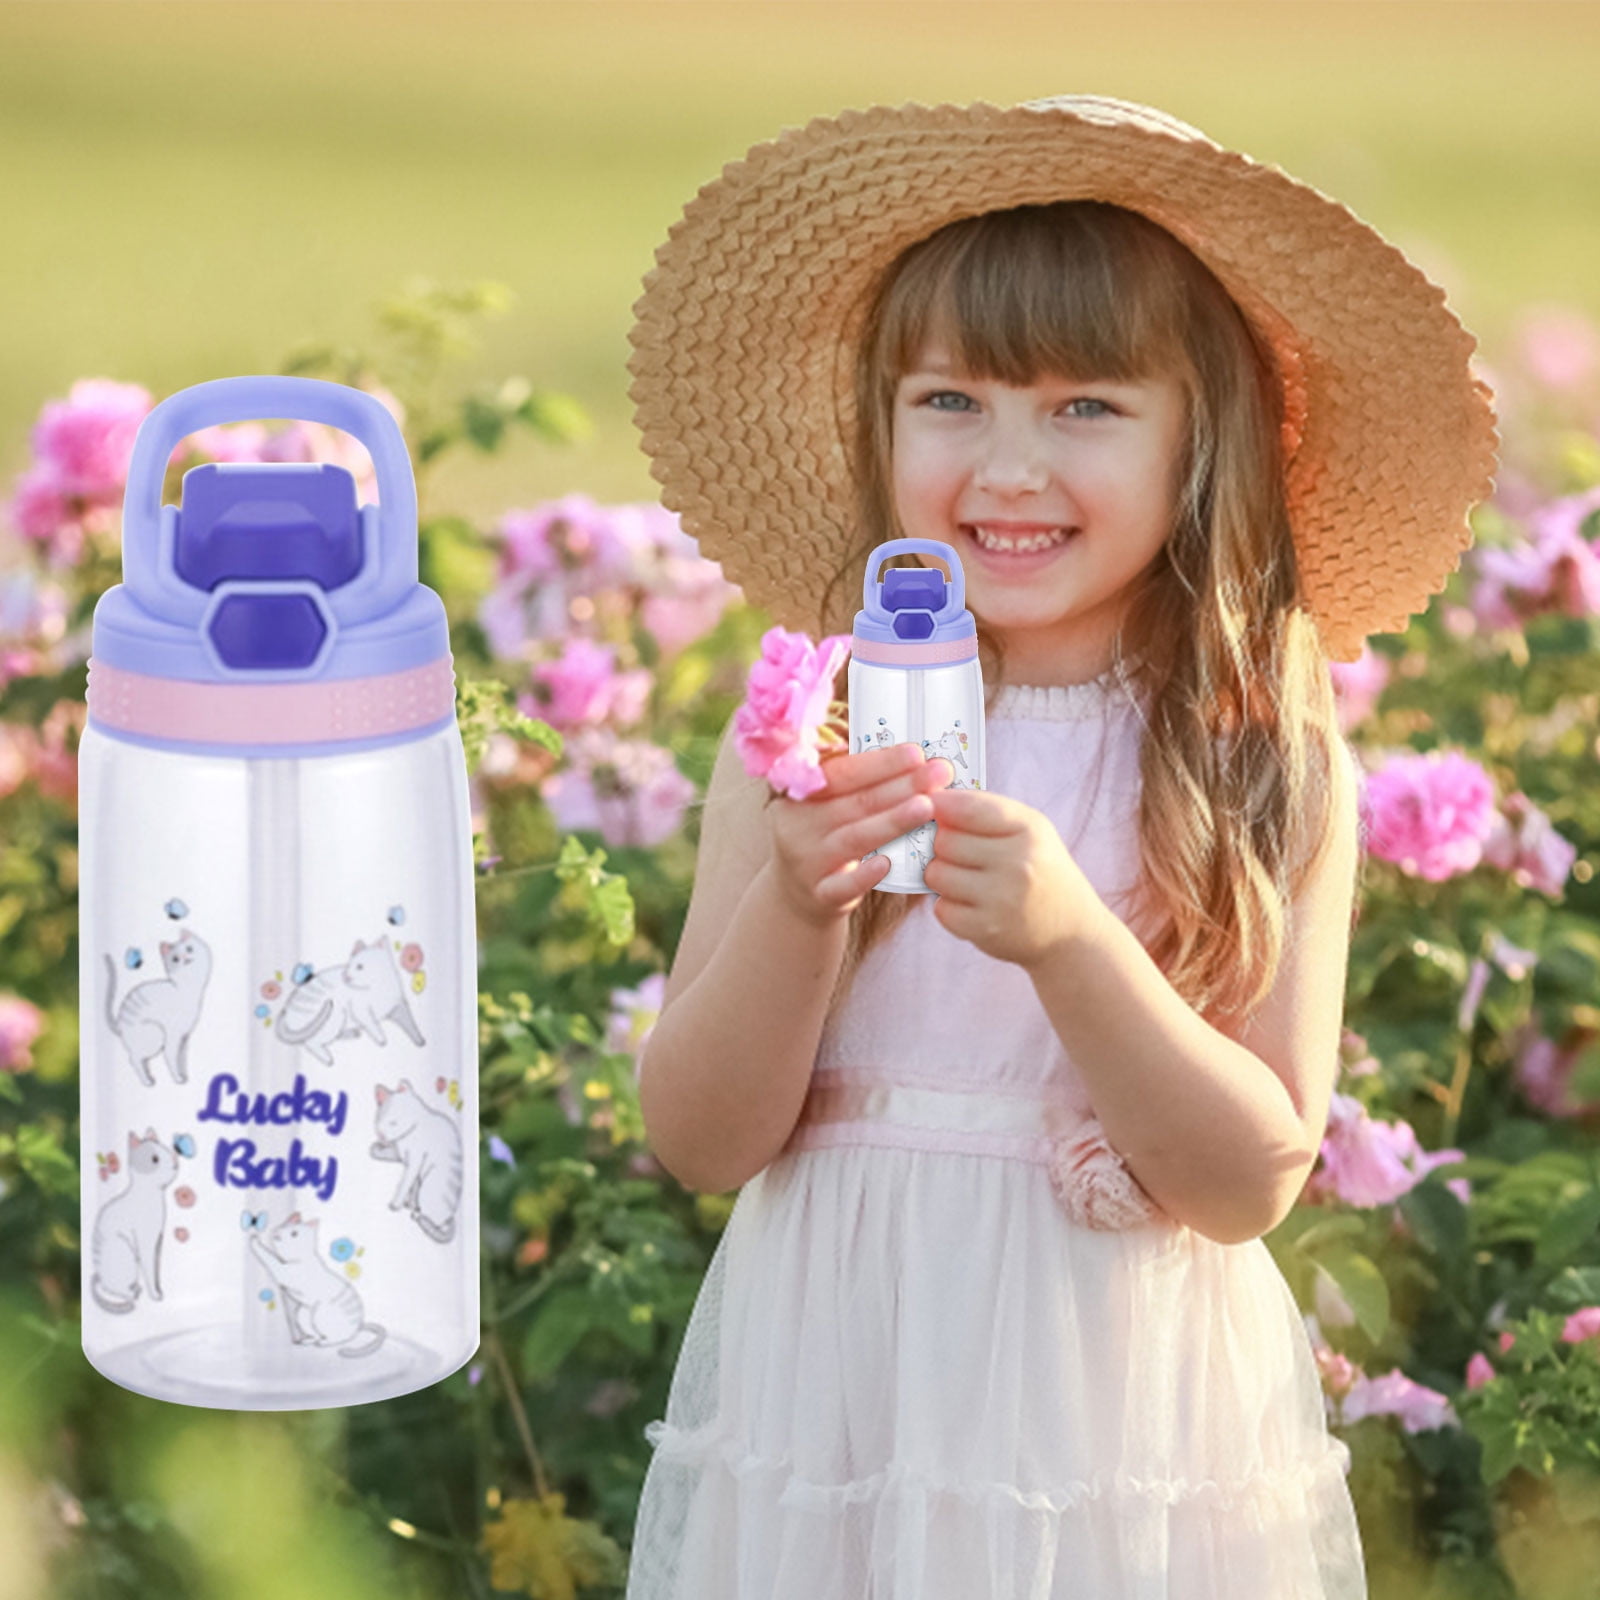 Aurigate Water Bottles for Girls, Cute Girls Water Bottles for School, Girls Cartoon Water Bottle with Straw and Safety Lock, Kids Water Bottles for